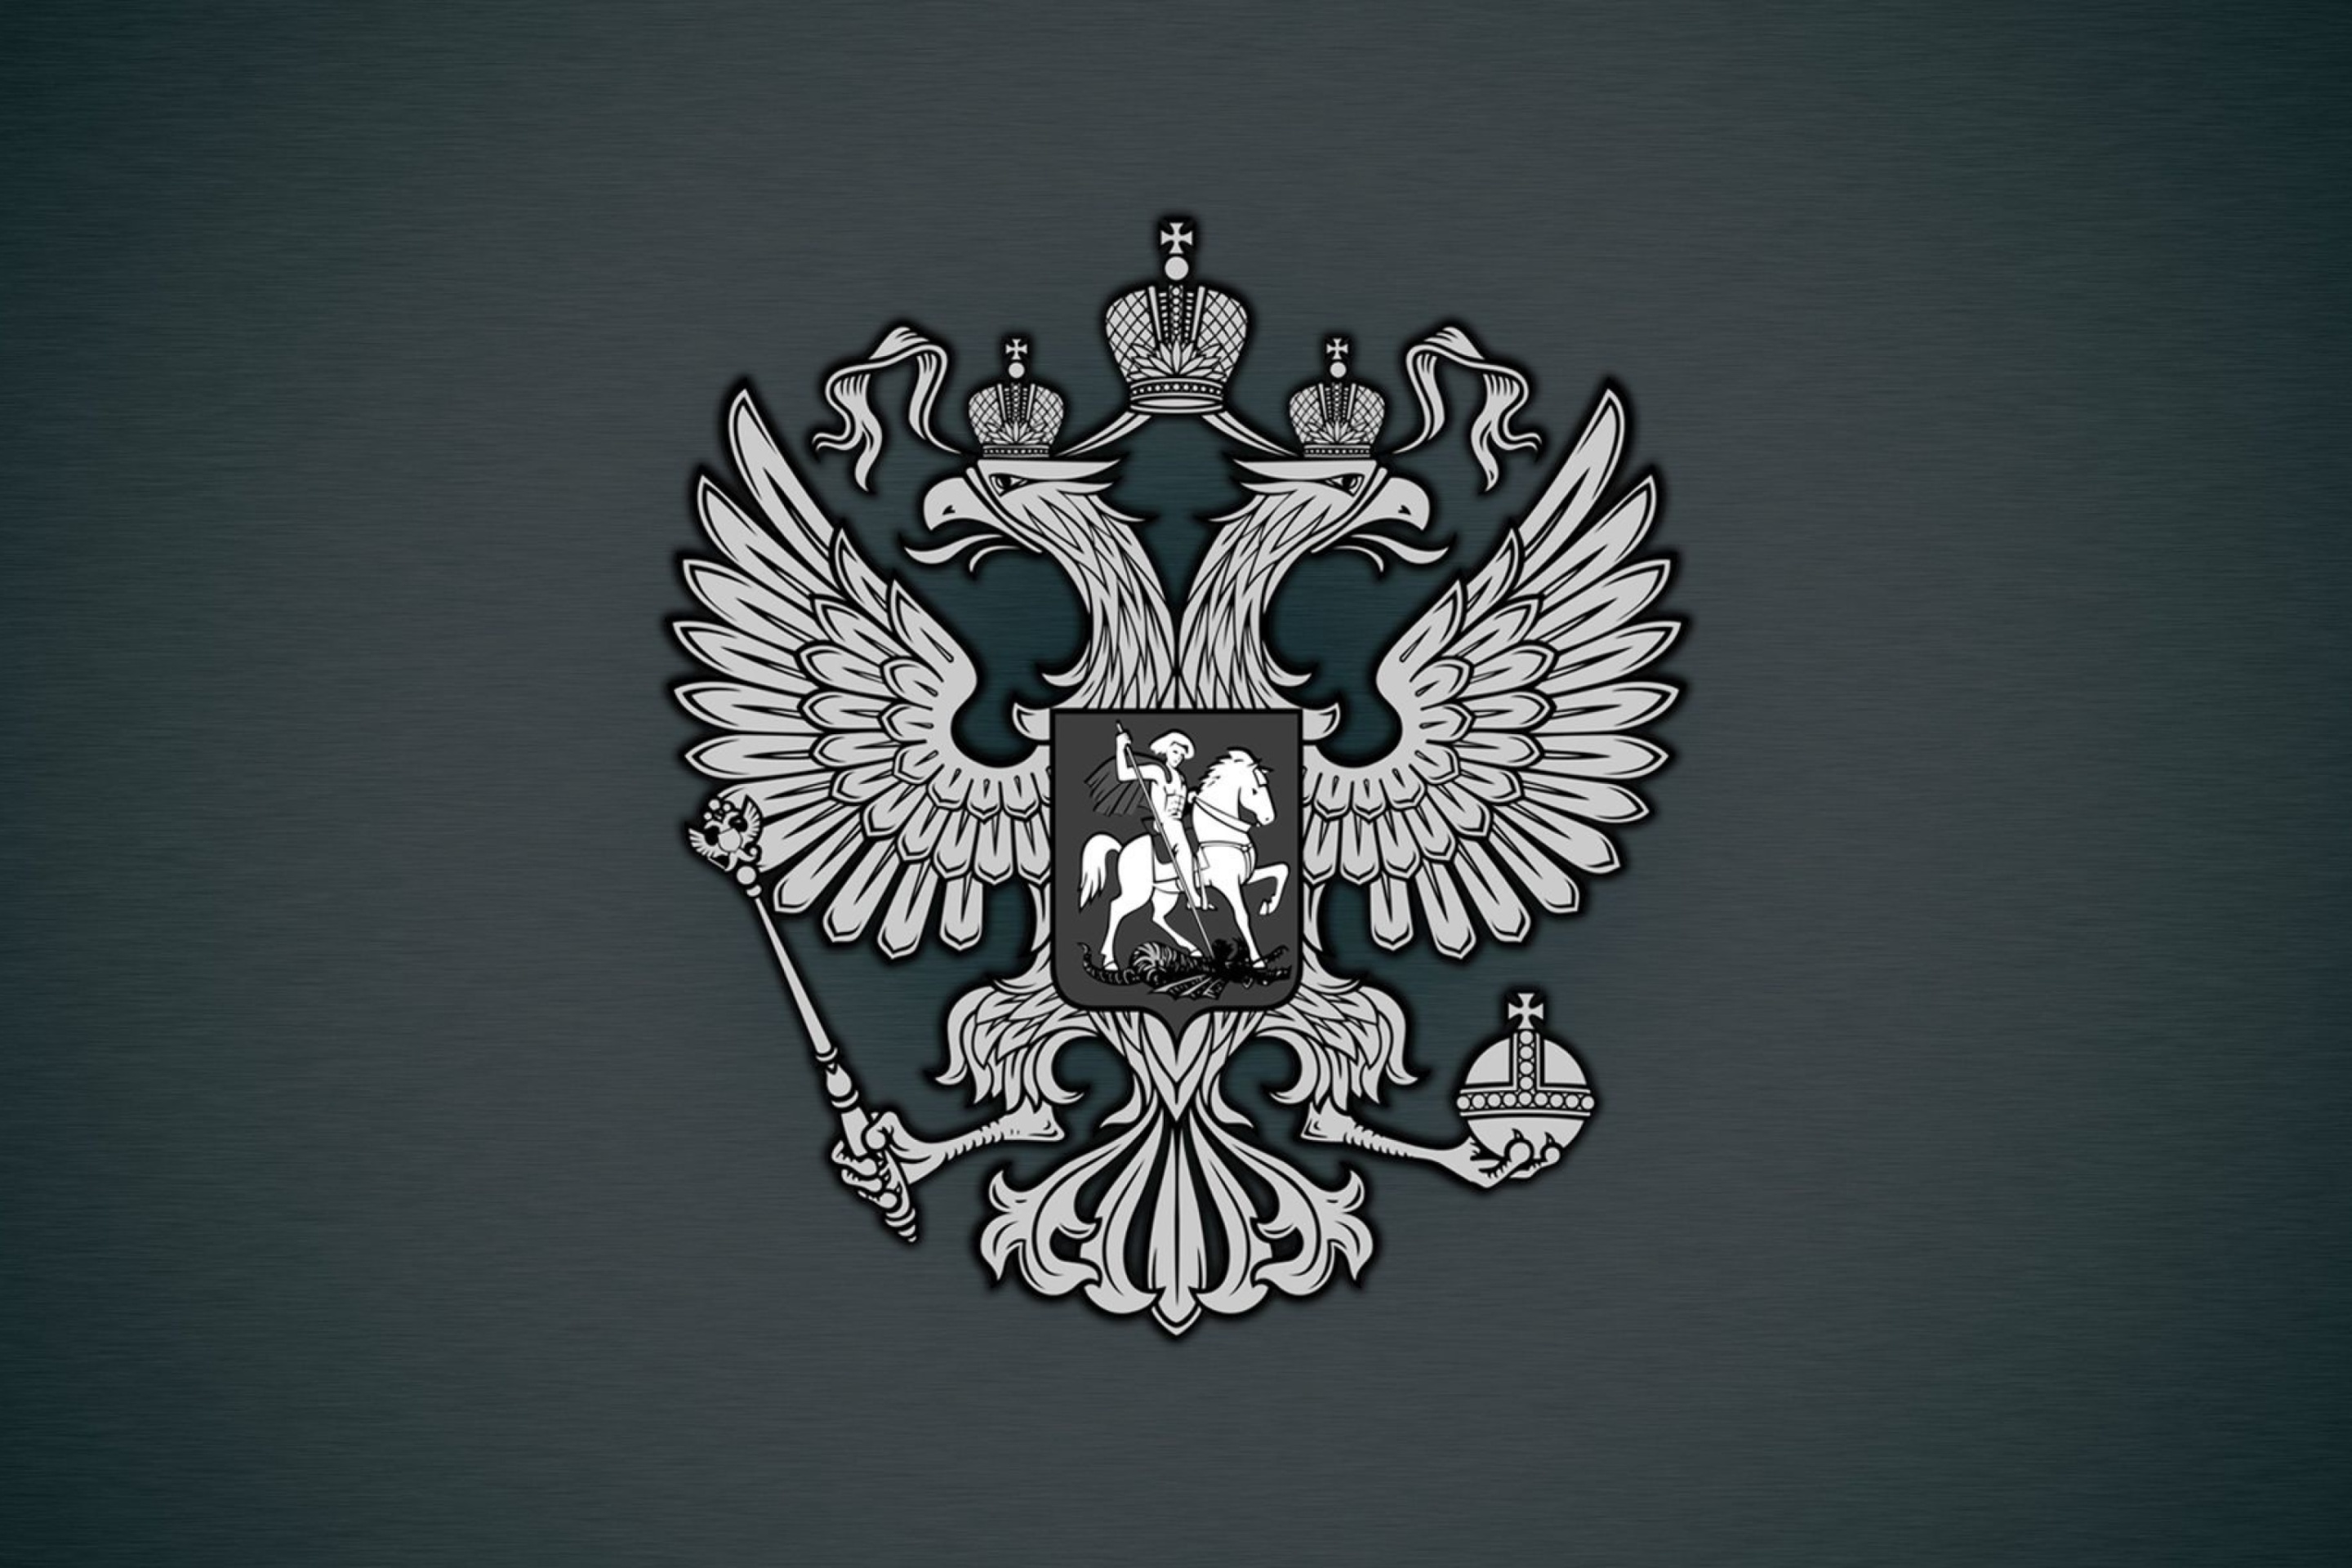 Das Coat of arms of Russia Wallpaper 2880x1920